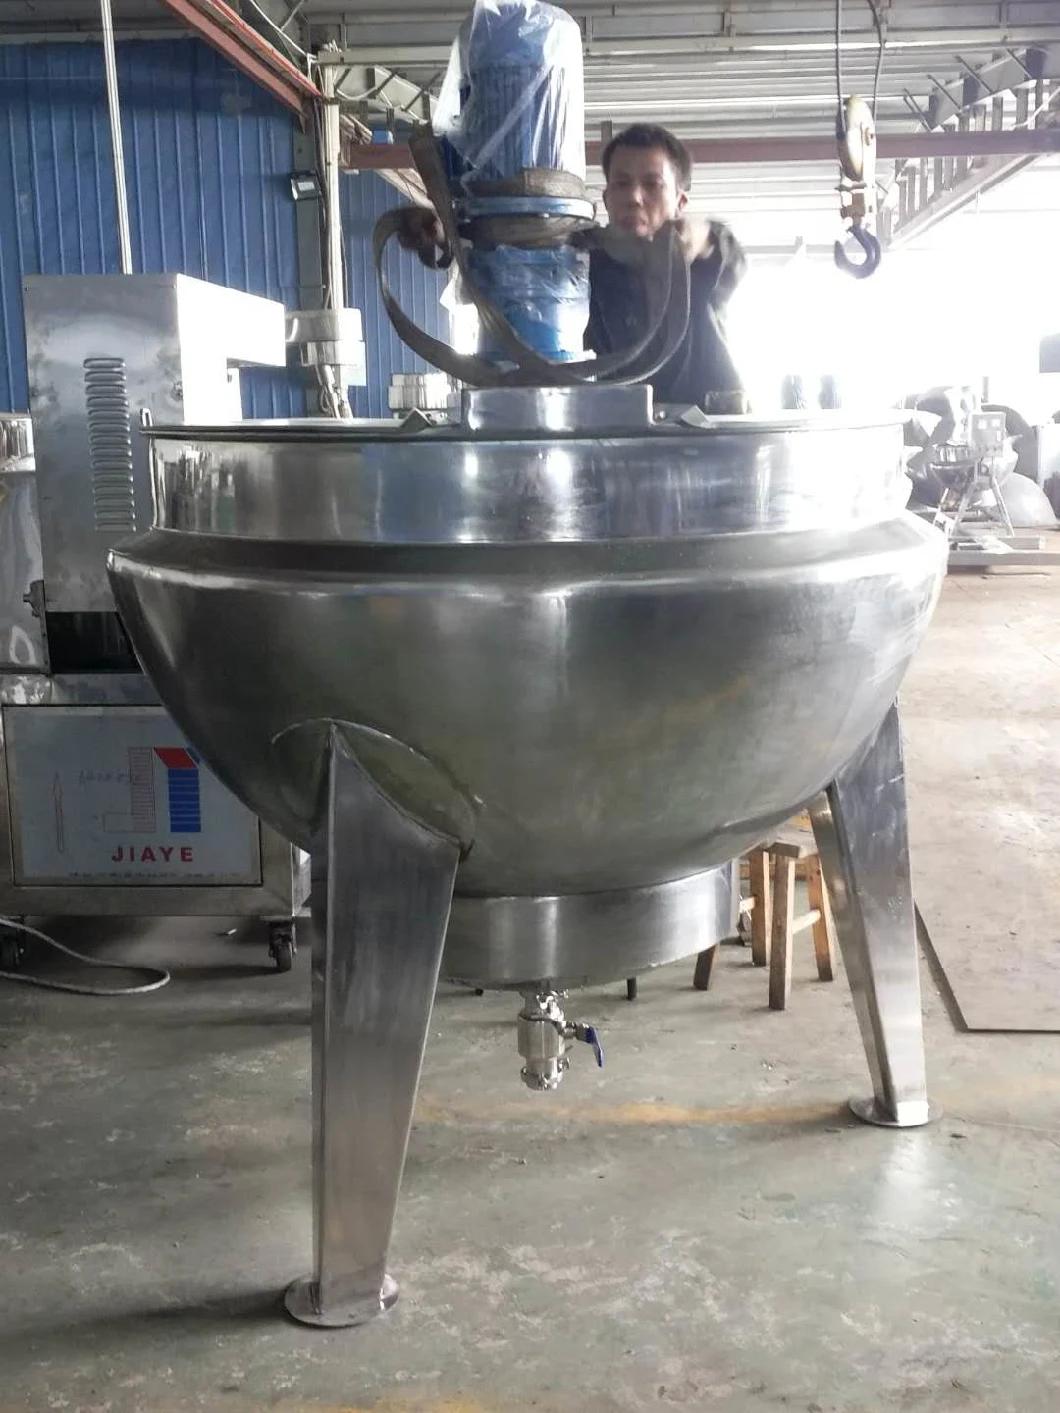 Steam /Hot Water Heating Jacketed Kttle for Jam Sauce Price